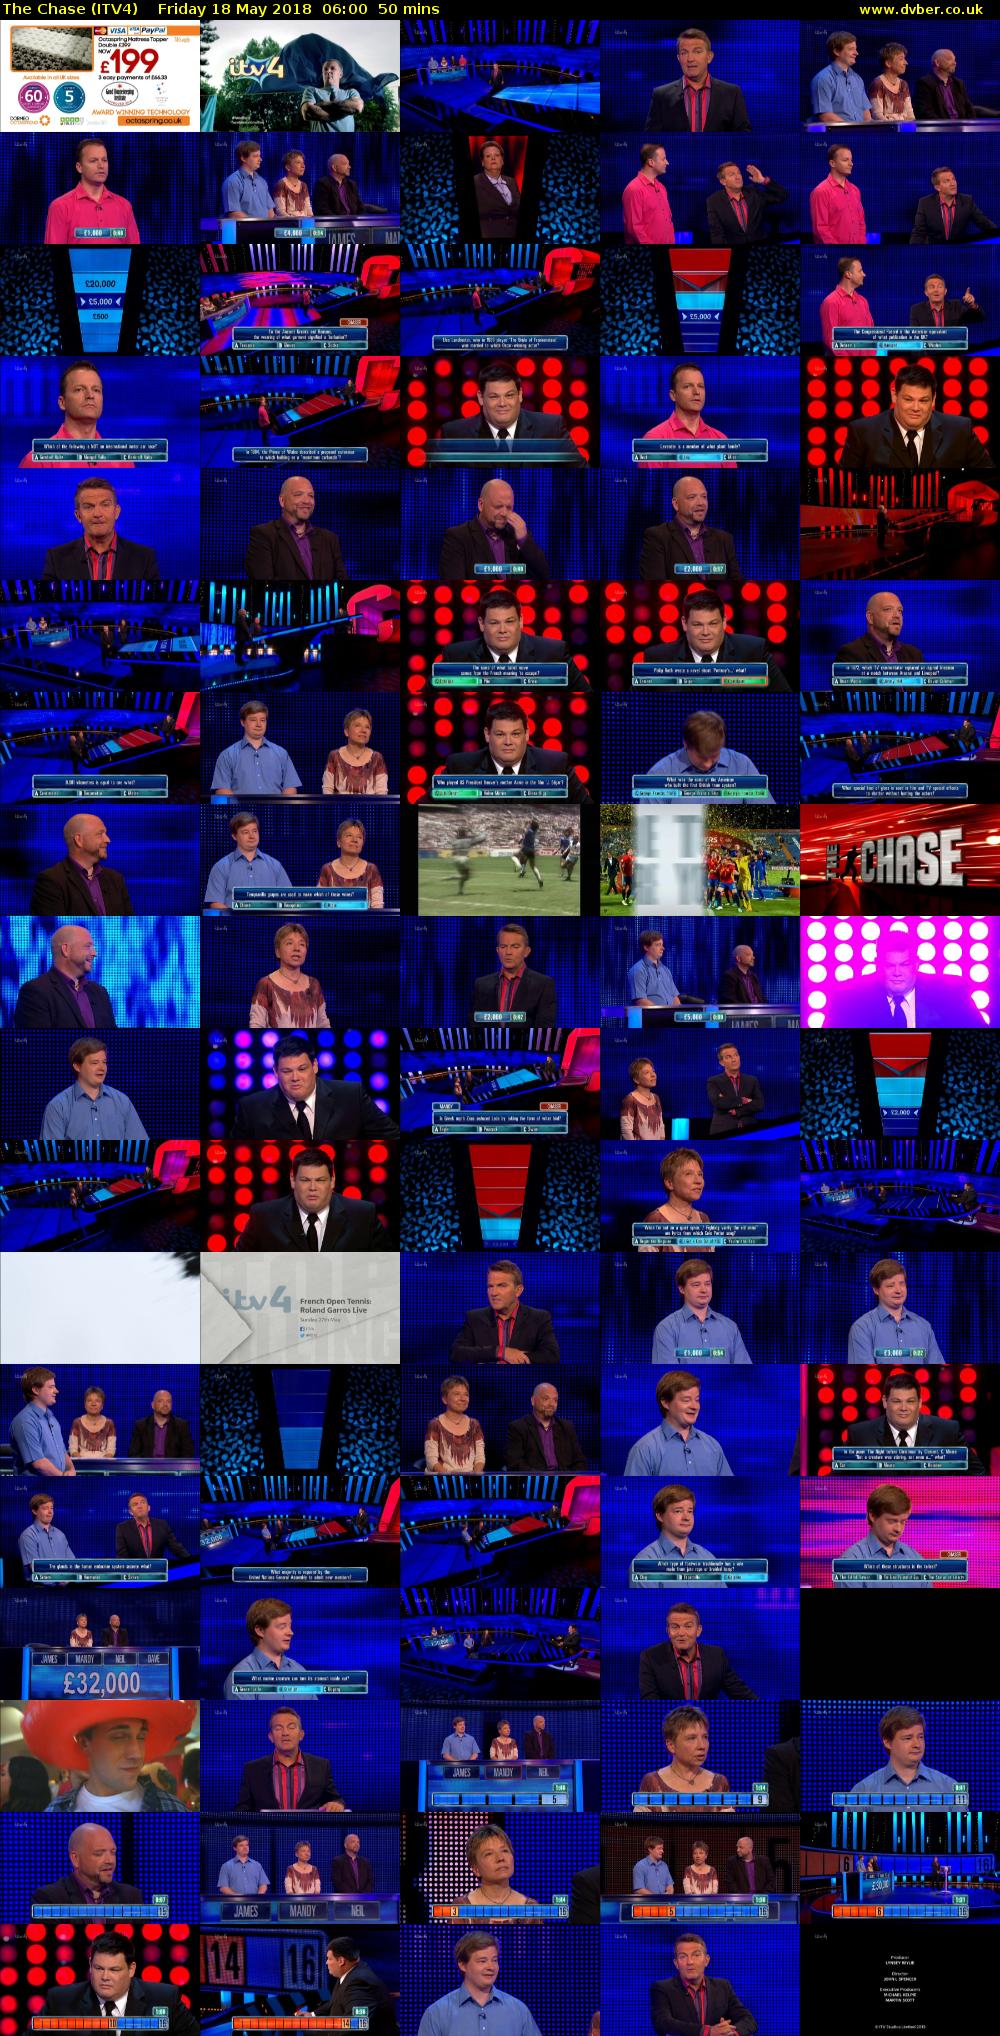 The Chase (ITV4) Friday 18 May 2018 06:00 - 06:50